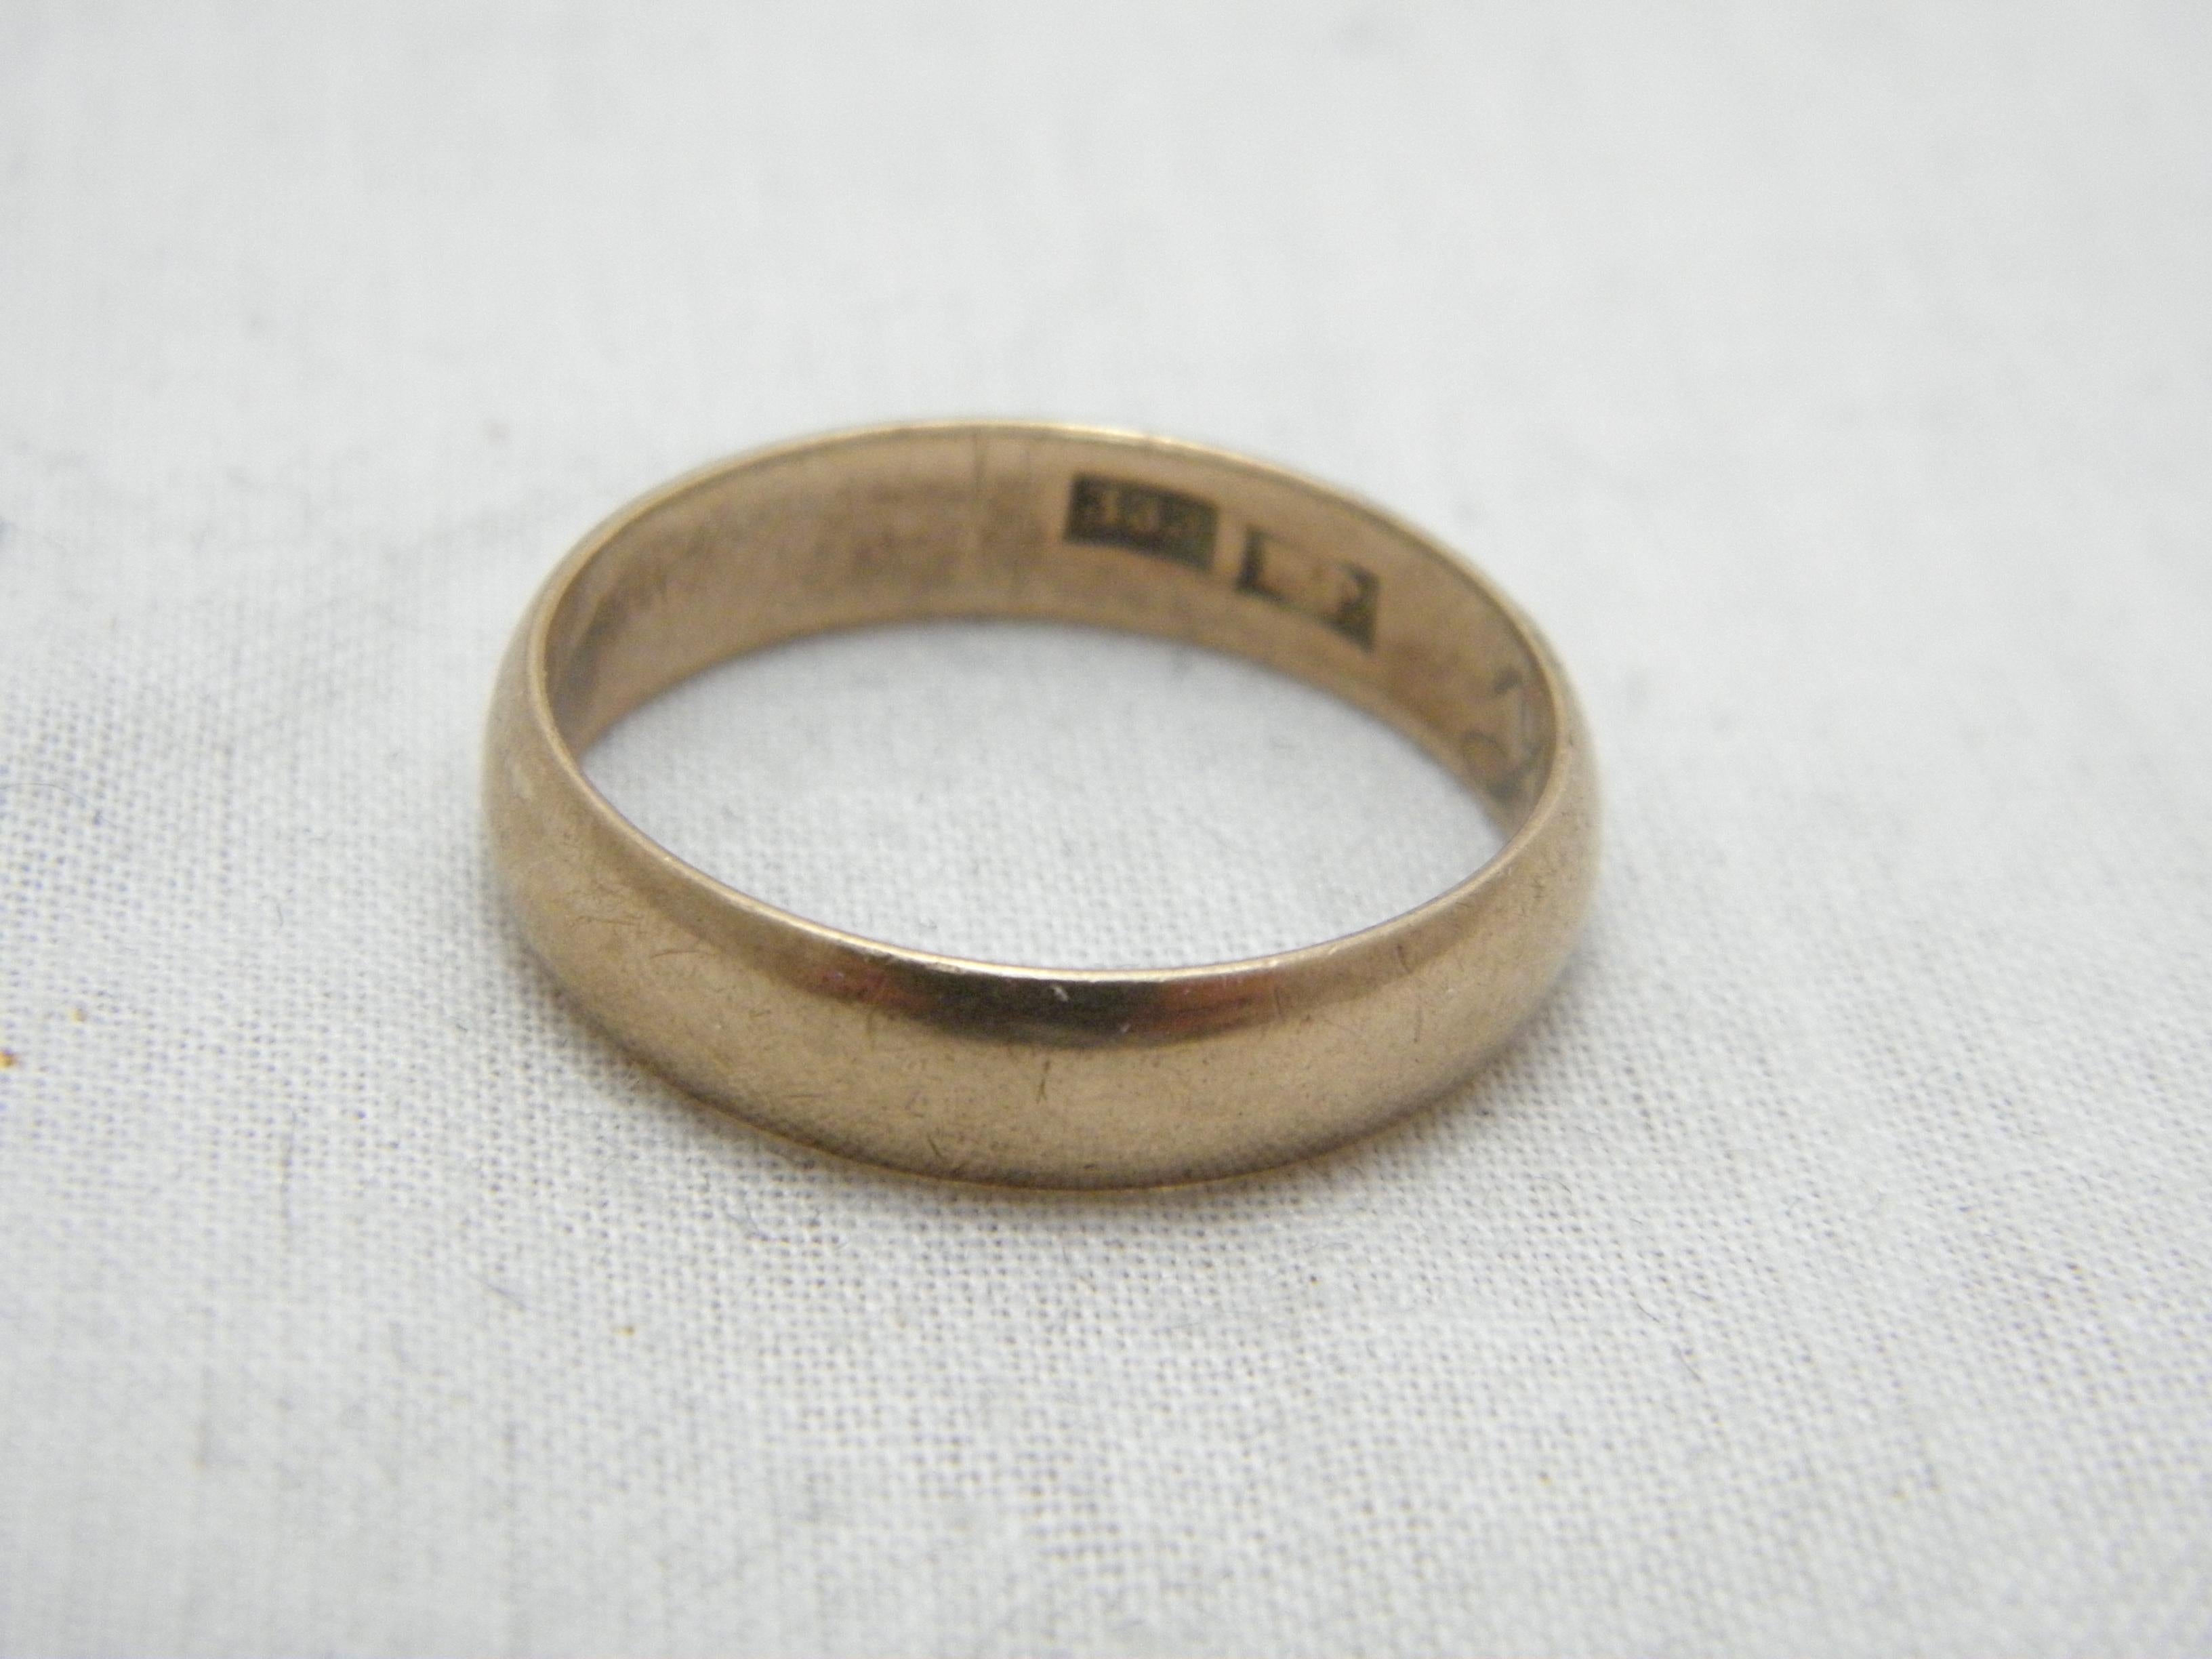 Antique 8ct Rose Gold 5mm Wedding Band Ring Art Deco c1920 U1/2 10.5 333 Purity For Sale 2